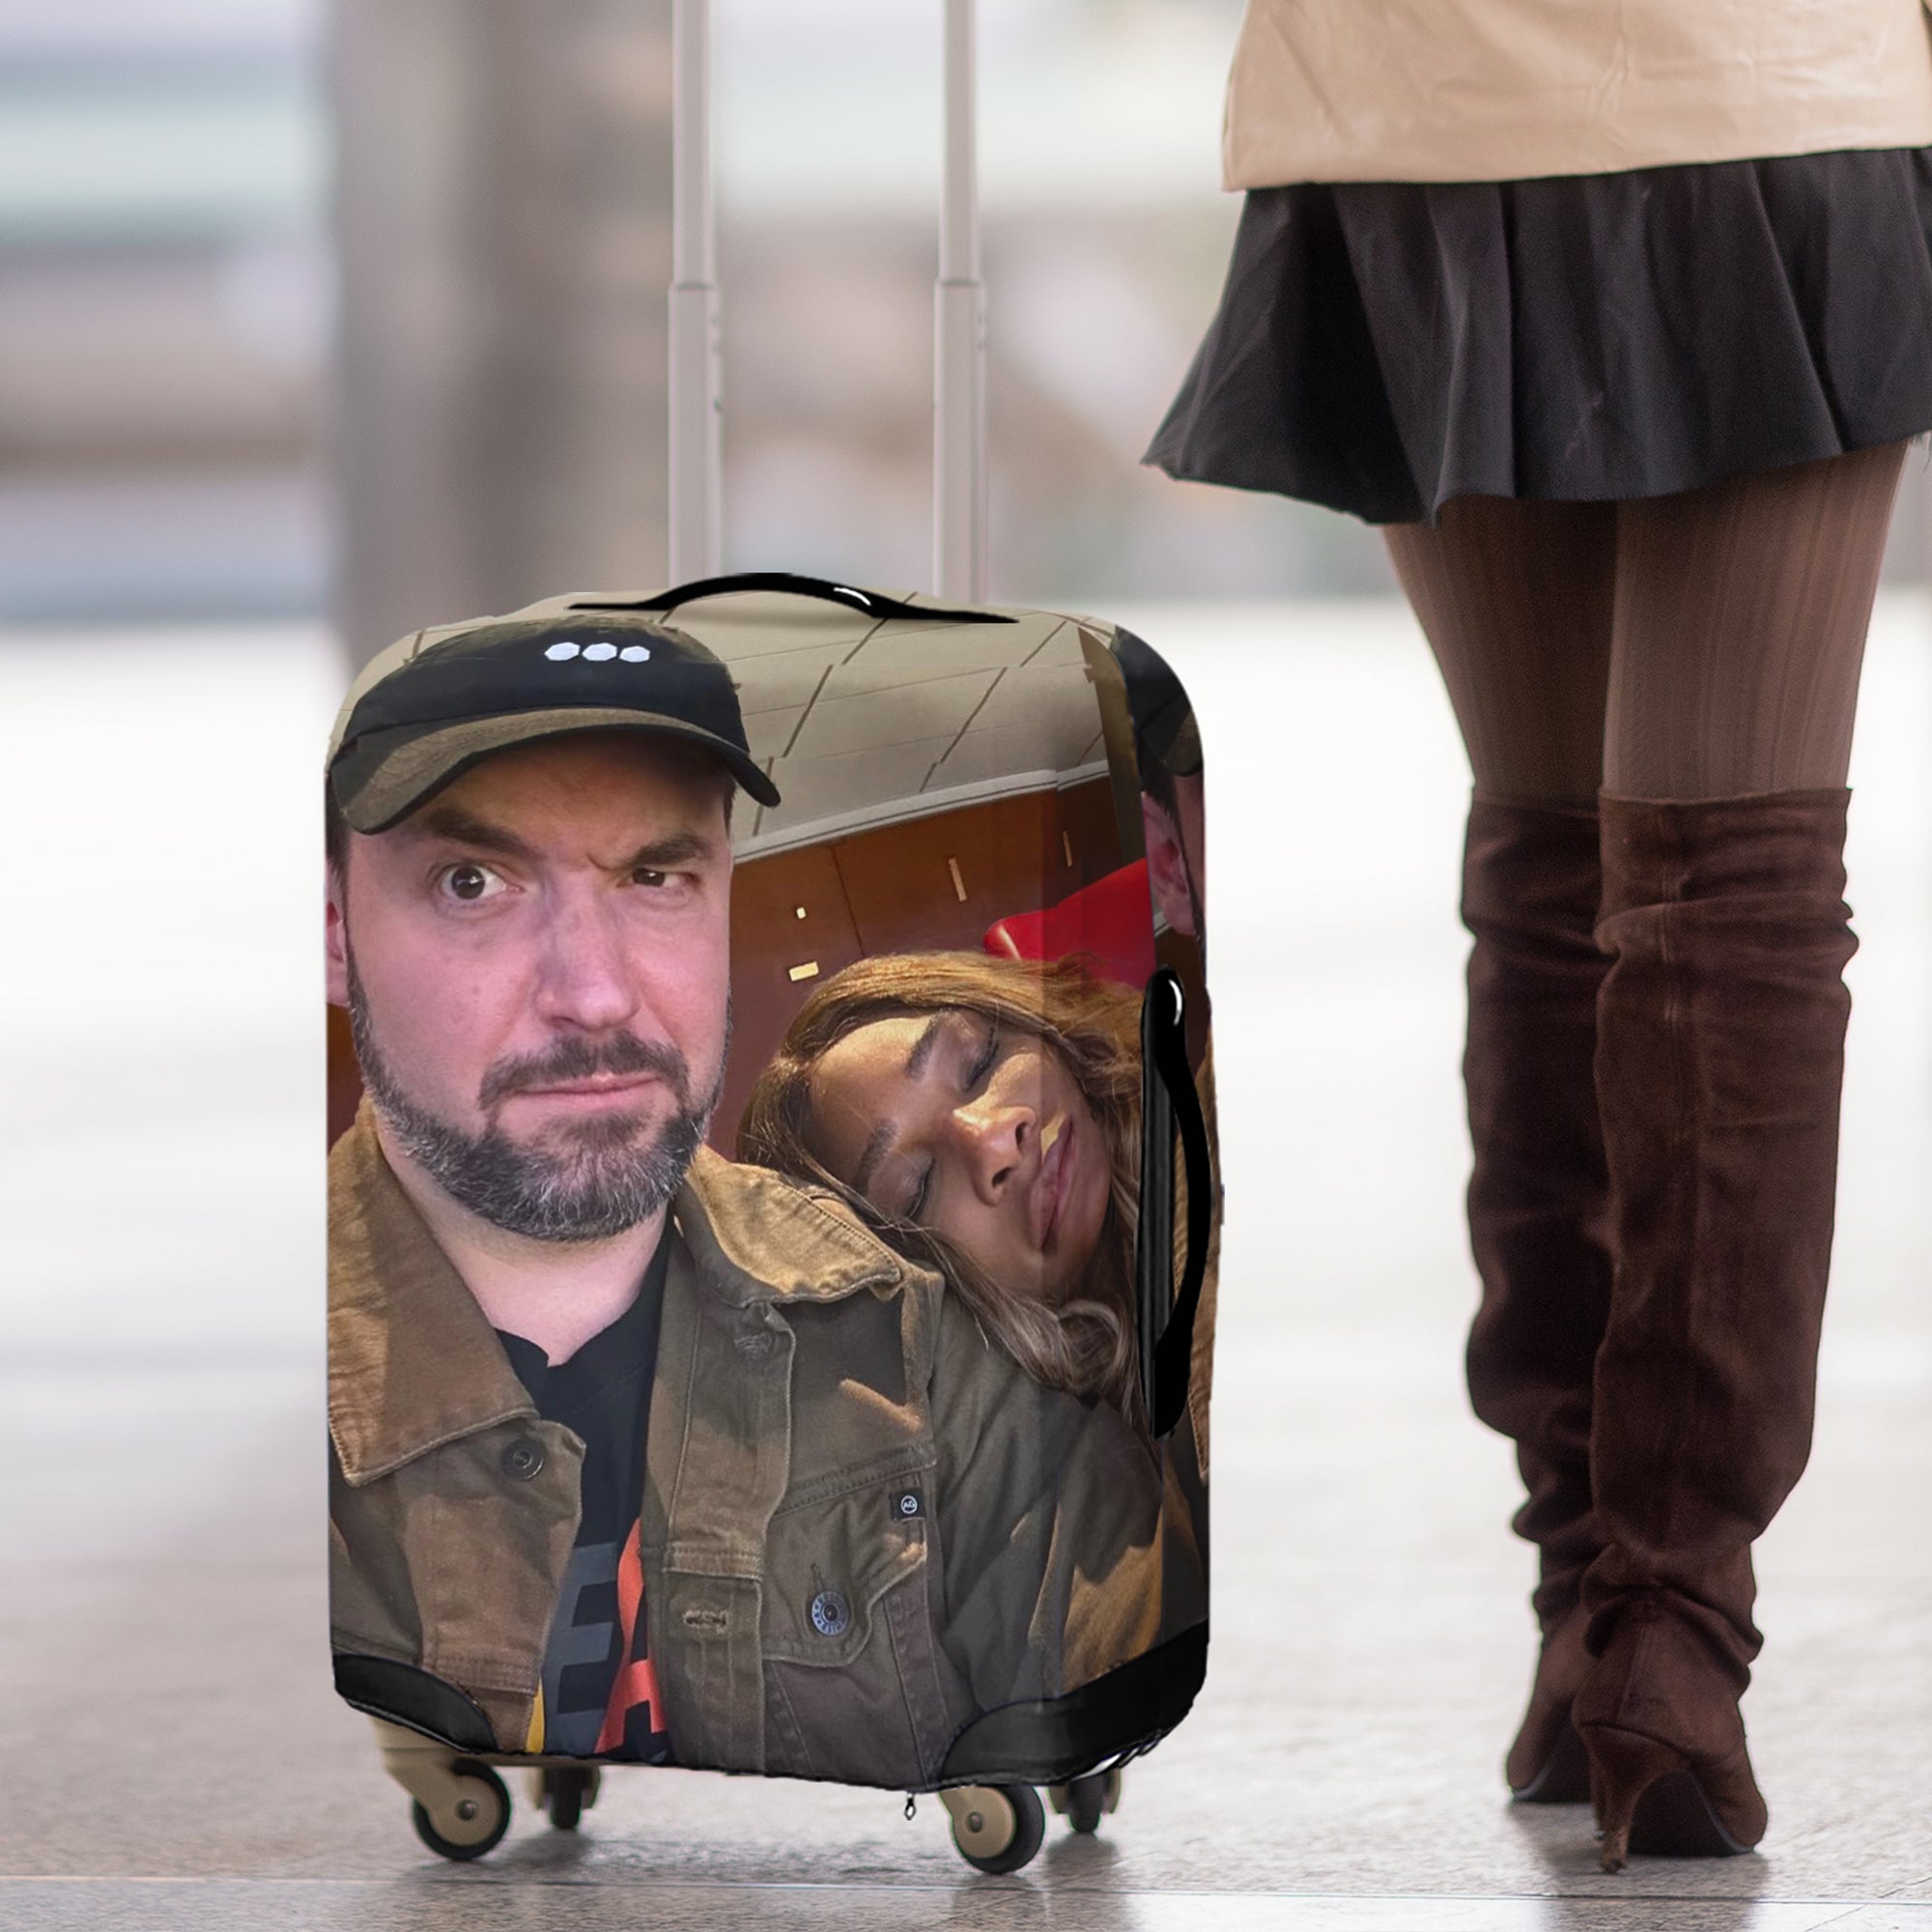 Custom Photo Luggage Cover, Funny Couple Gift For Upcoming Trips 02qhqn060724-Homacus